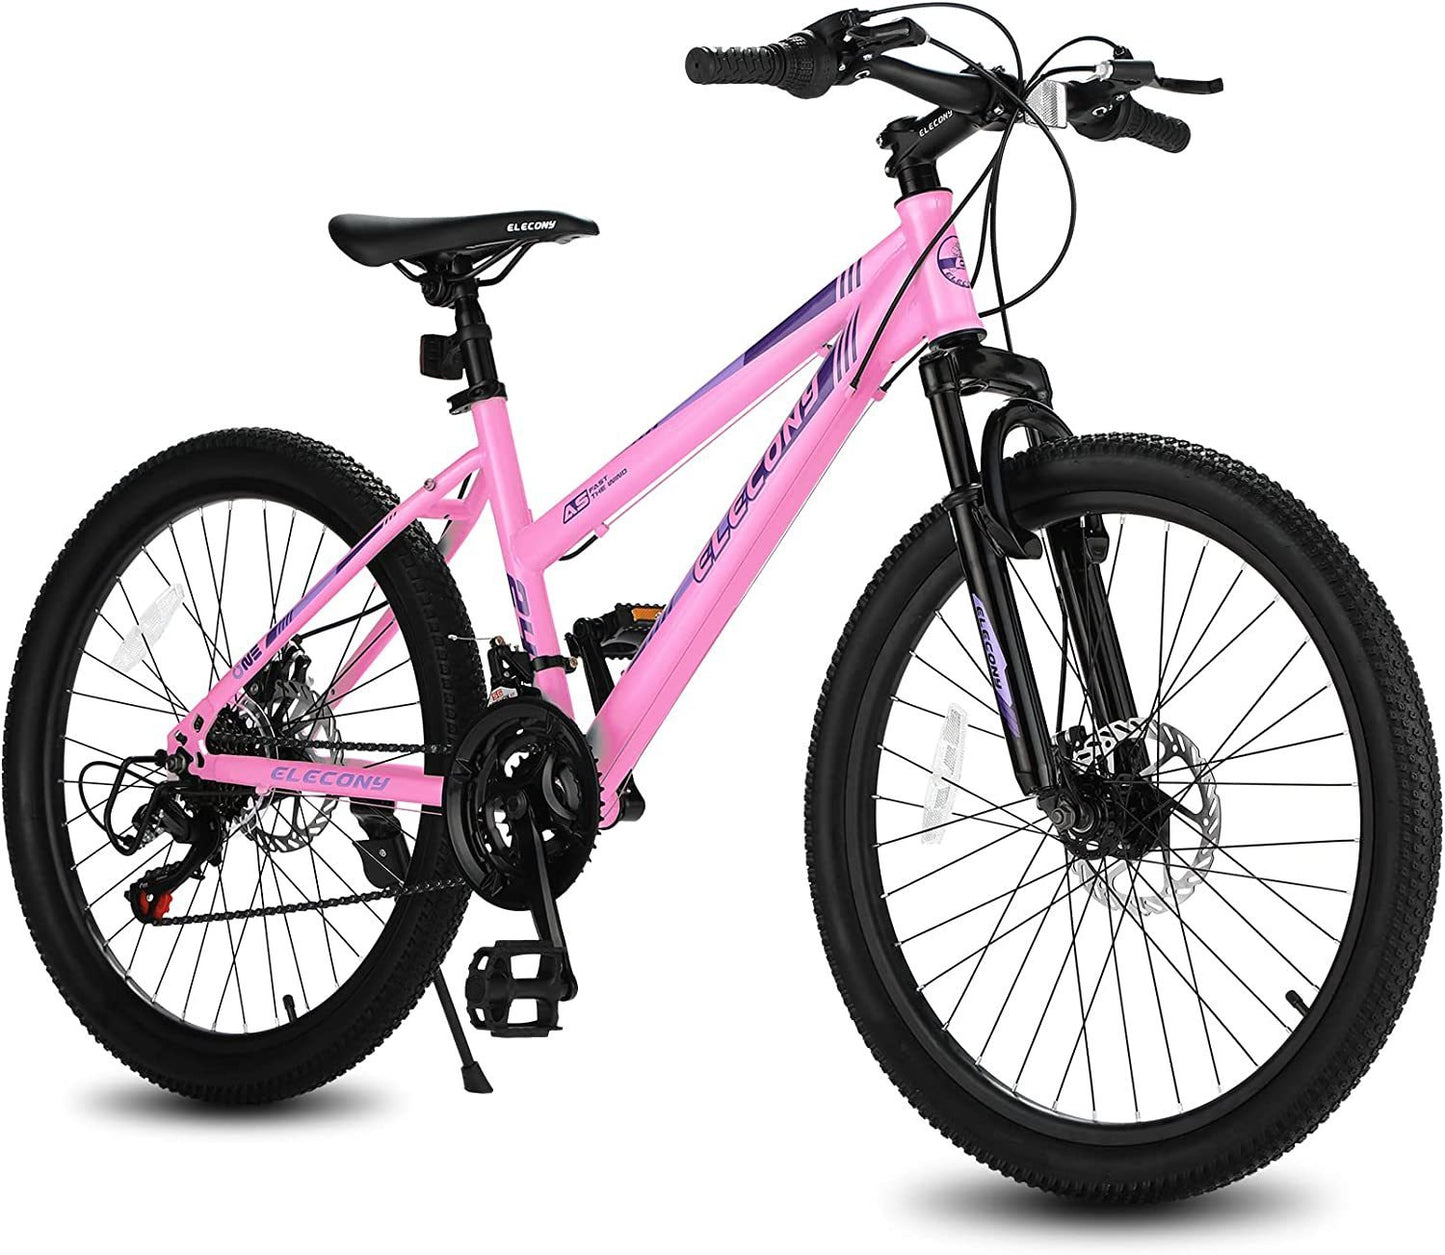 S24103 Elecony 24 inch Mountain Bike for Teenagers Girls Women, Shimano 21 Speeds Gear MTB with Dual Disc Brakes and 100mm Front Suspension, White/Pink